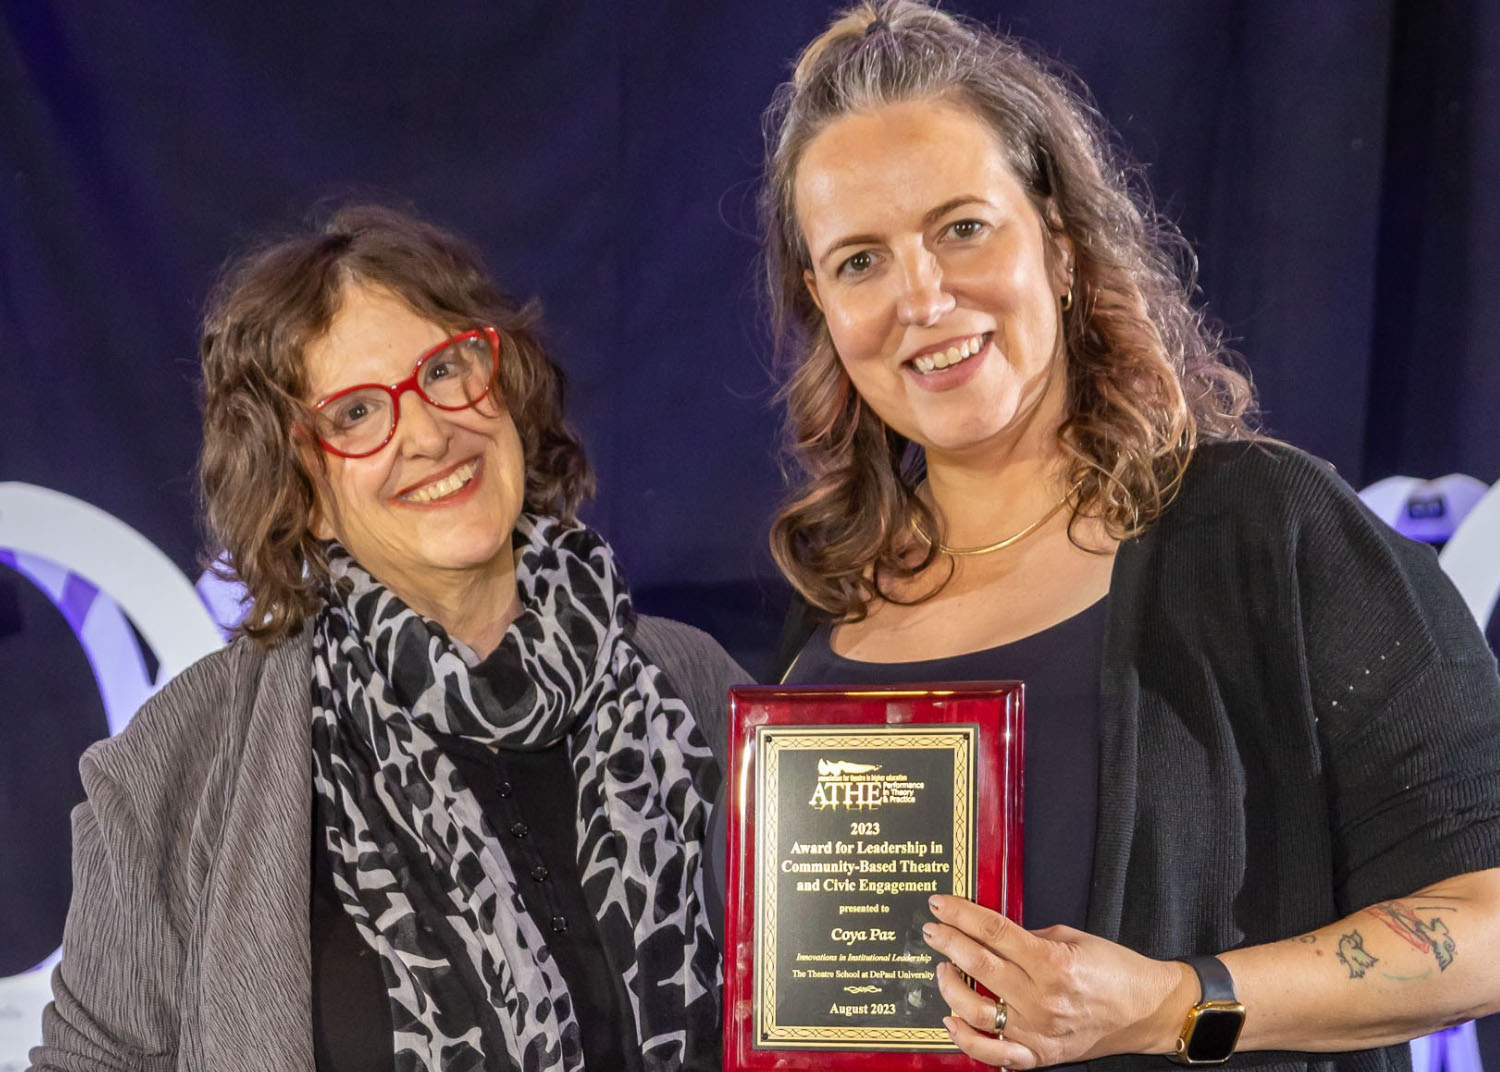 Coya Paz receives award from Joan Lipkin,the ATHE awards committee co-chair.